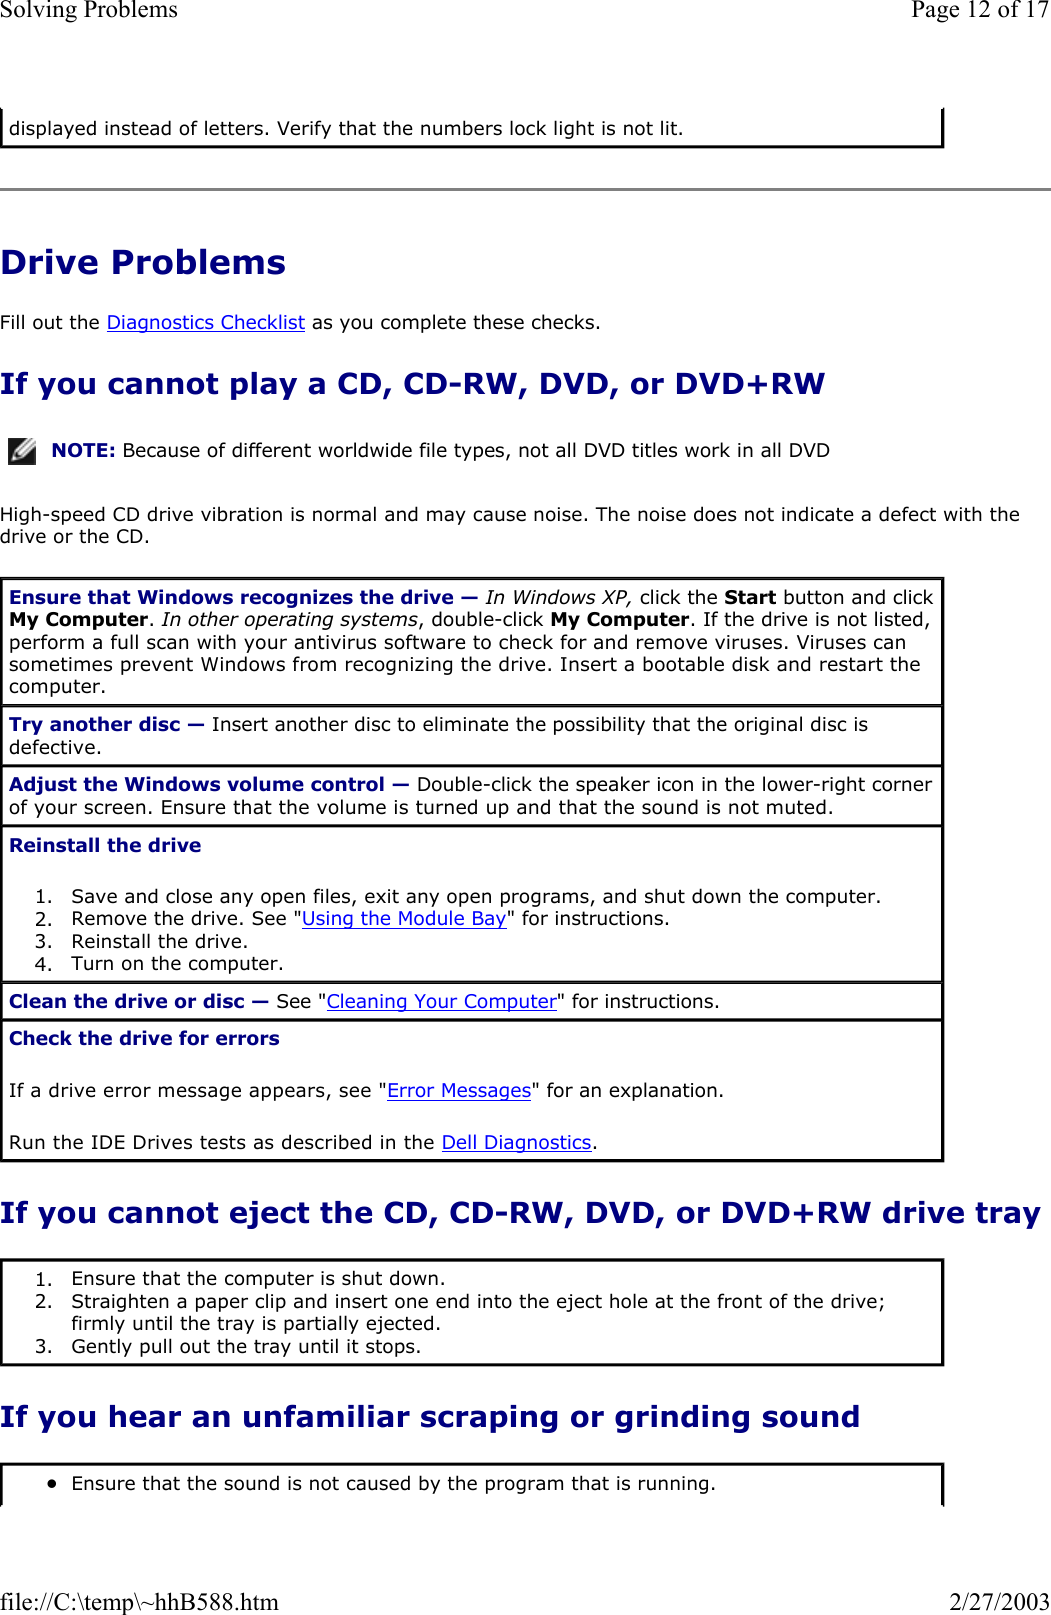 Drive Problems Fill out the Diagnostics Checklist as you complete these checks. If you cannot play a CD, CD-RW, DVD, or DVD+RW High-speed CD drive vibration is normal and may cause noise. The noise does not indicate a defect with the drive or the CD. If you cannot eject the CD, CD-RW, DVD, or DVD+RW drive tray If you hear an unfamiliar scraping or grinding sound displayed instead of letters. Verify that the numbers lock light is not lit. NOTE: Because of different worldwide file types, not all DVD titles work in all DVD Ensure that Windows recognizes the drive — In Windows XP, click the Start button and click My Computer. In other operating systems, double-click My Computer. If the drive is not listed, perform a full scan with your antivirus software to check for and remove viruses. Viruses can sometimes prevent Windows from recognizing the drive. Insert a bootable disk and restart the computer.  Try another disc — Insert another disc to eliminate the possibility that the original disc is defective. Adjust the Windows volume control — Double-click the speaker icon in the lower-right corner of your screen. Ensure that the volume is turned up and that the sound is not muted.  Reinstall the drive 1. Save and close any open files, exit any open programs, and shut down the computer.  2. Remove the drive. See &quot;Using the Module Bay&quot; for instructions.  3. Reinstall the drive.  4. Turn on the computer.  Clean the drive or disc — See &quot;Cleaning Your Computer&quot; for instructions.  Check the drive for errors If a drive error message appears, see &quot;Error Messages&quot; for an explanation. Run the IDE Drives tests as described in the Dell Diagnostics. 1. Ensure that the computer is shut down.  2. Straighten a paper clip and insert one end into the eject hole at the front of the drive; firmly until the tray is partially ejected.  3. Gently pull out the tray until it stops.  zEnsure that the sound is not caused by the program that is running.  Page 12 of 17Solving Problems2/27/2003file://C:\temp\~hhB588.htm